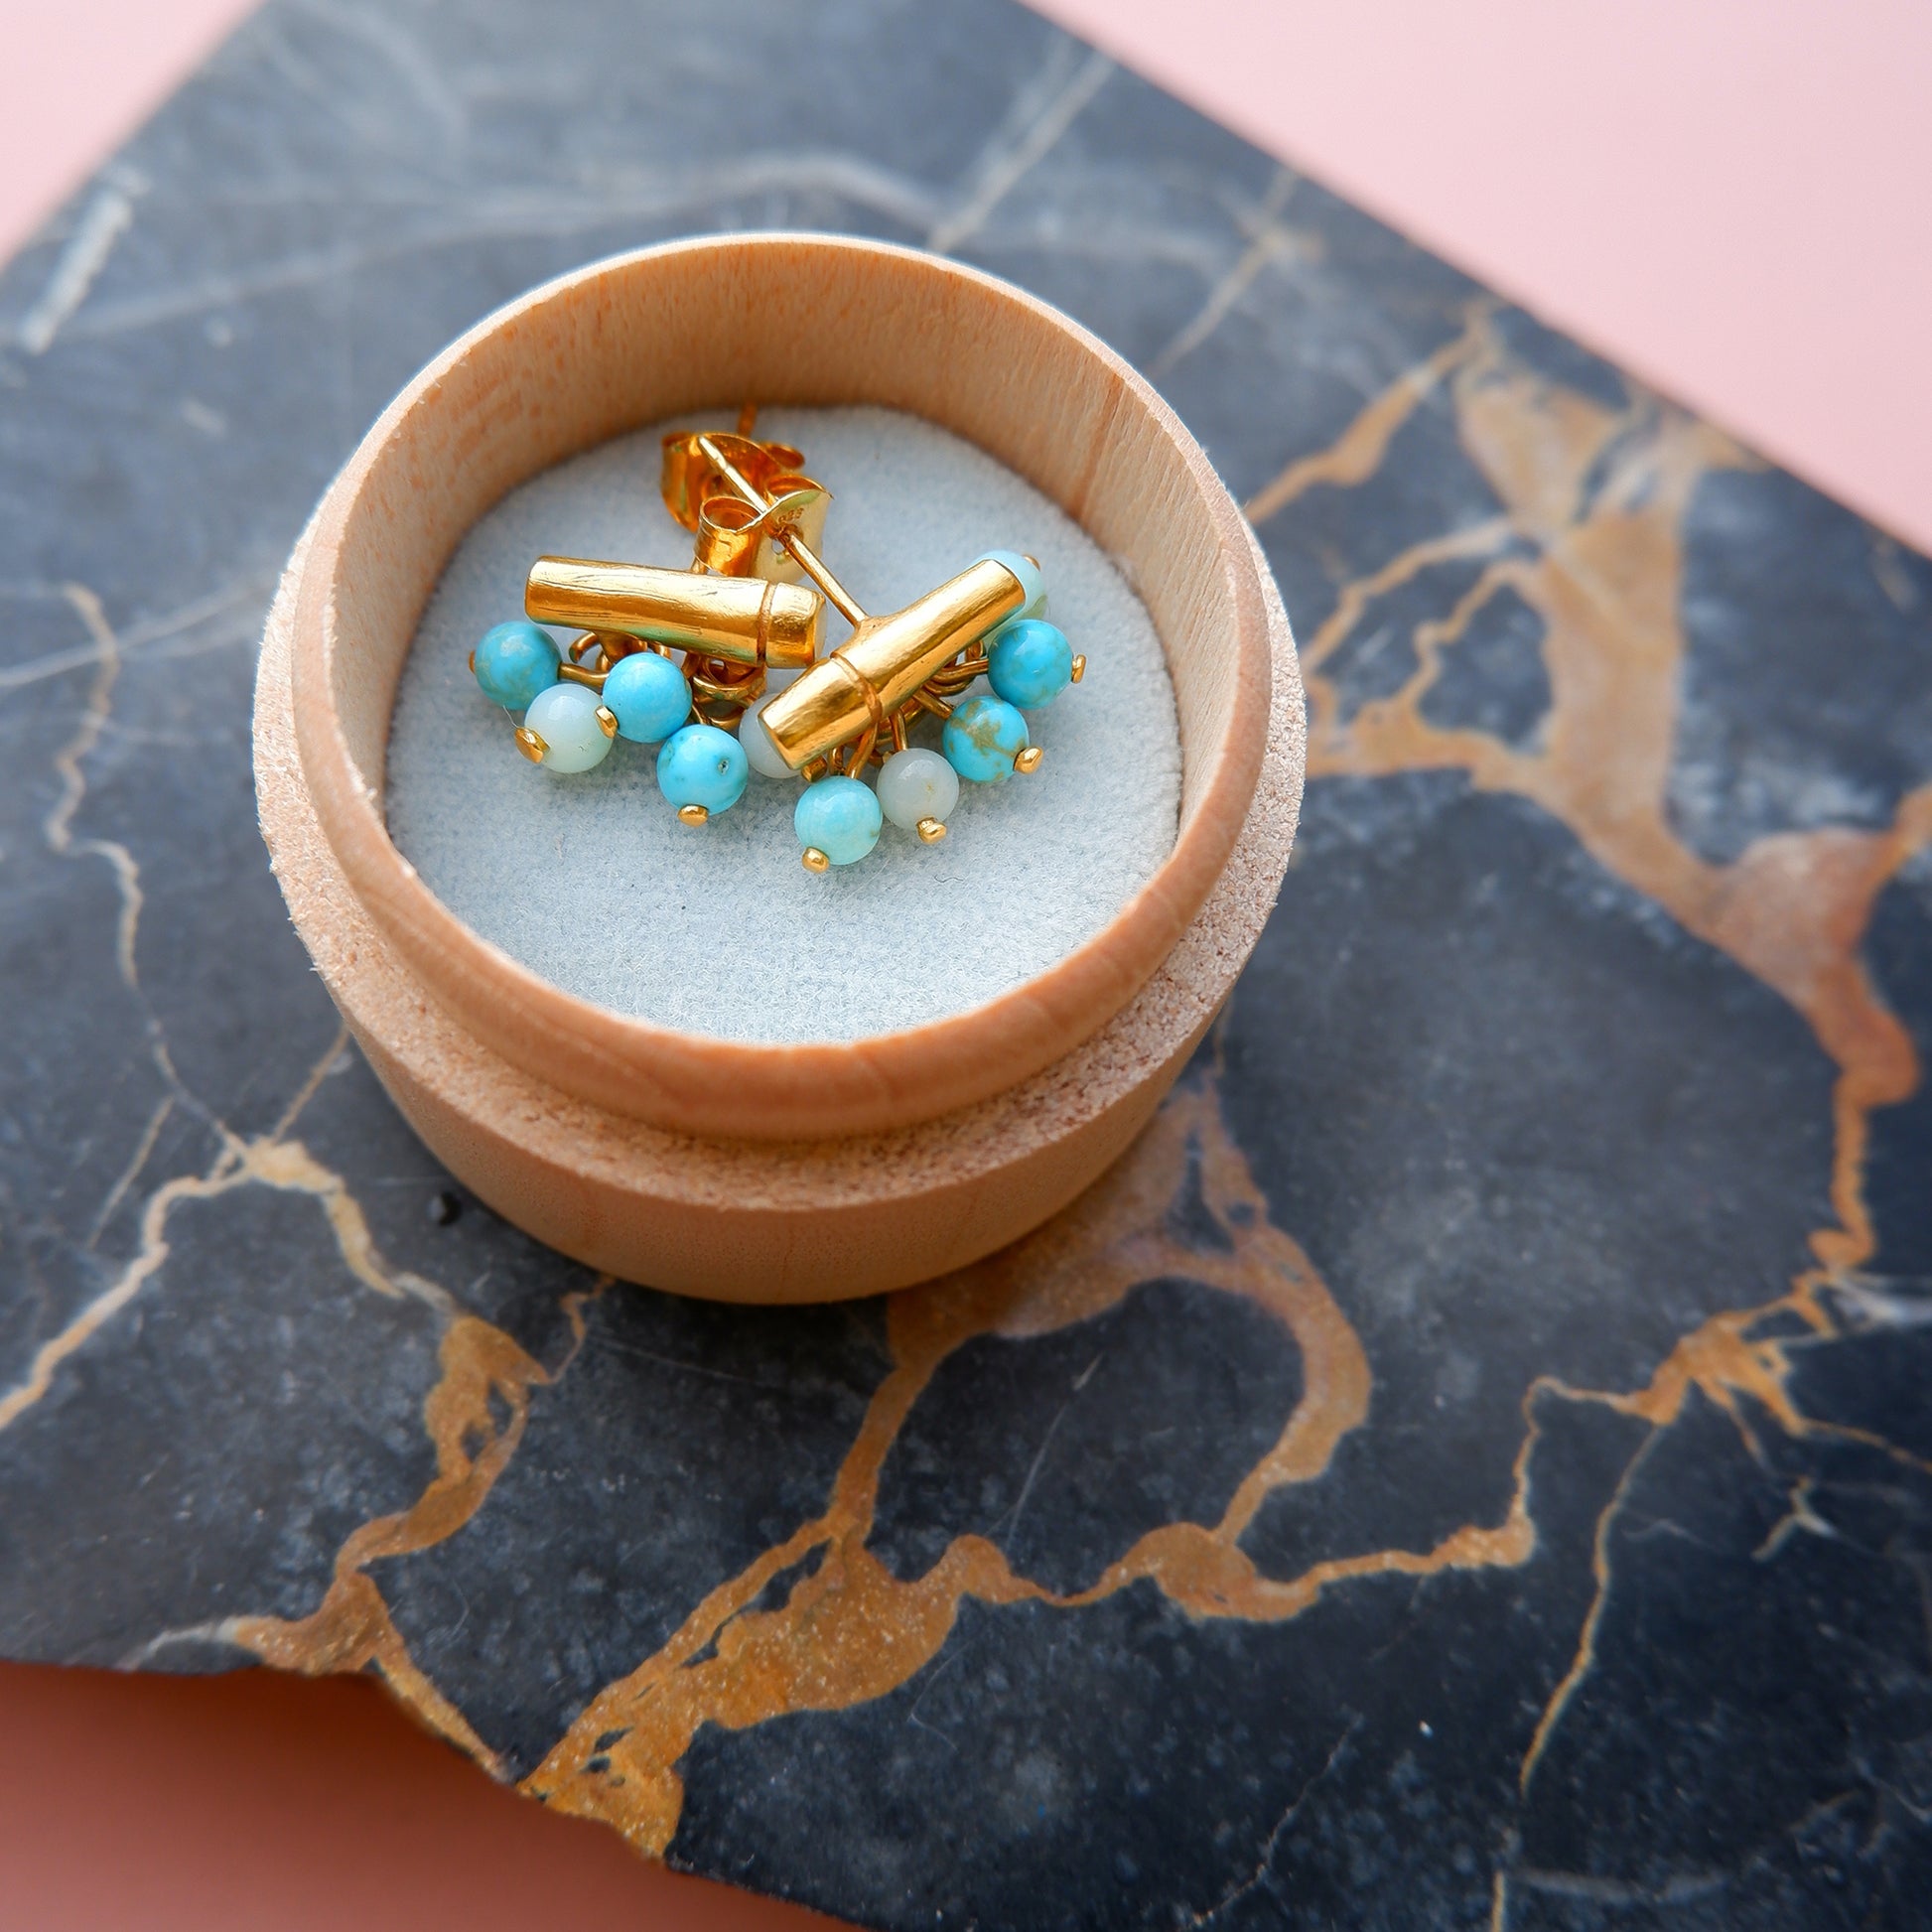 gold vermeil bamboo bar stud earrings with turquoise & blue gemstone beads, in a wooden gift box, on black marble